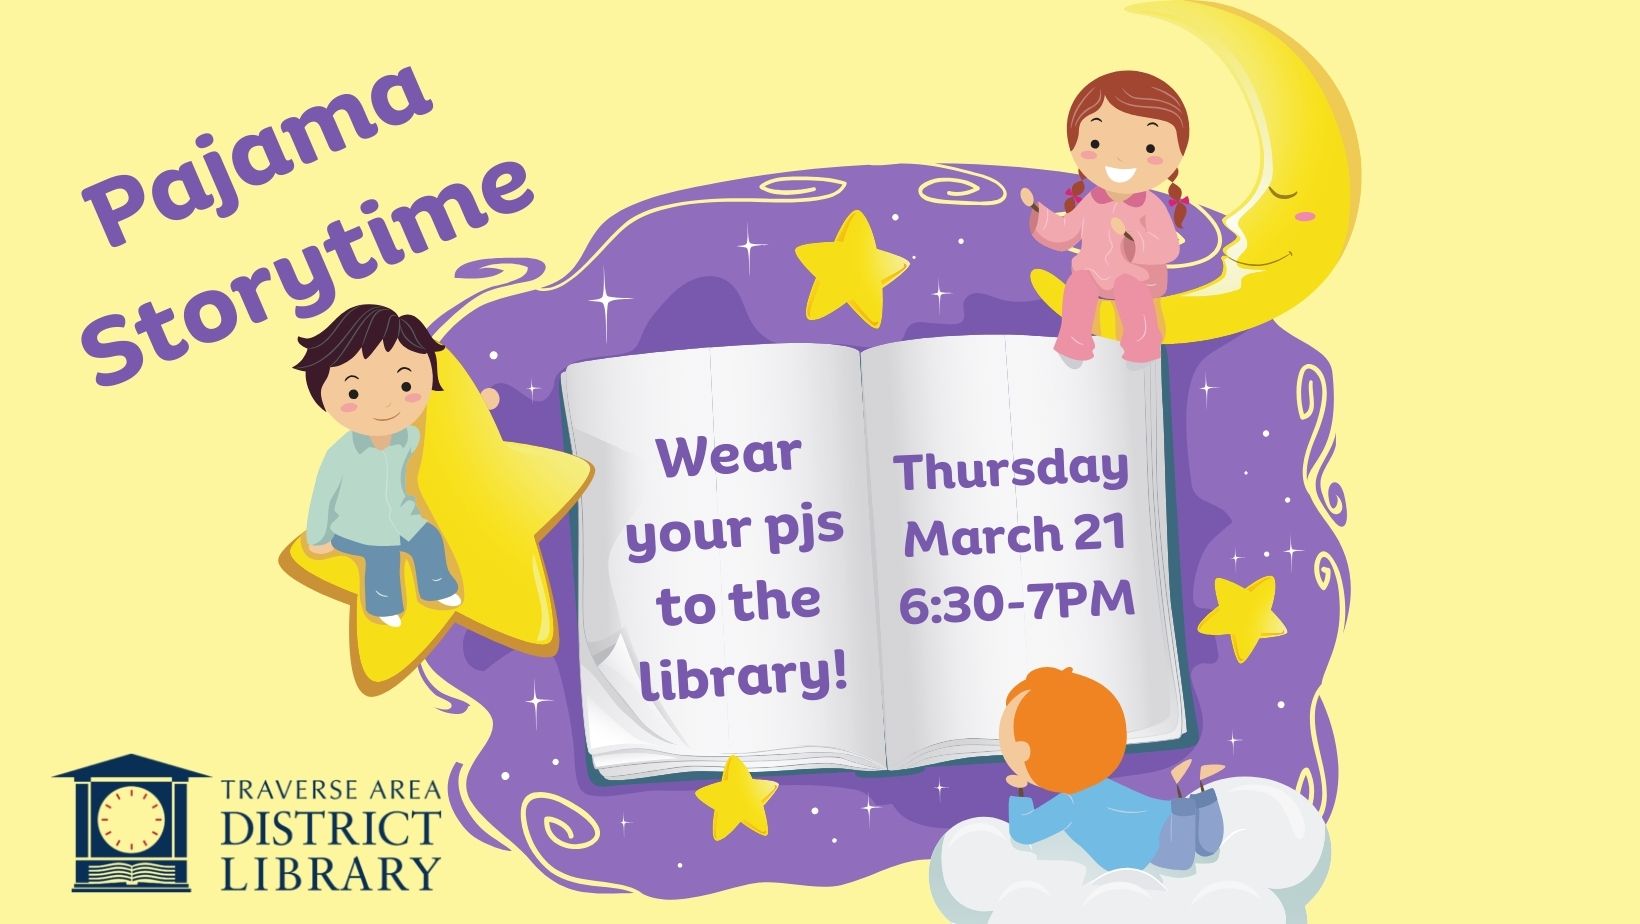 Pajama storytime event; picture of kids in pjs, around stars and a book